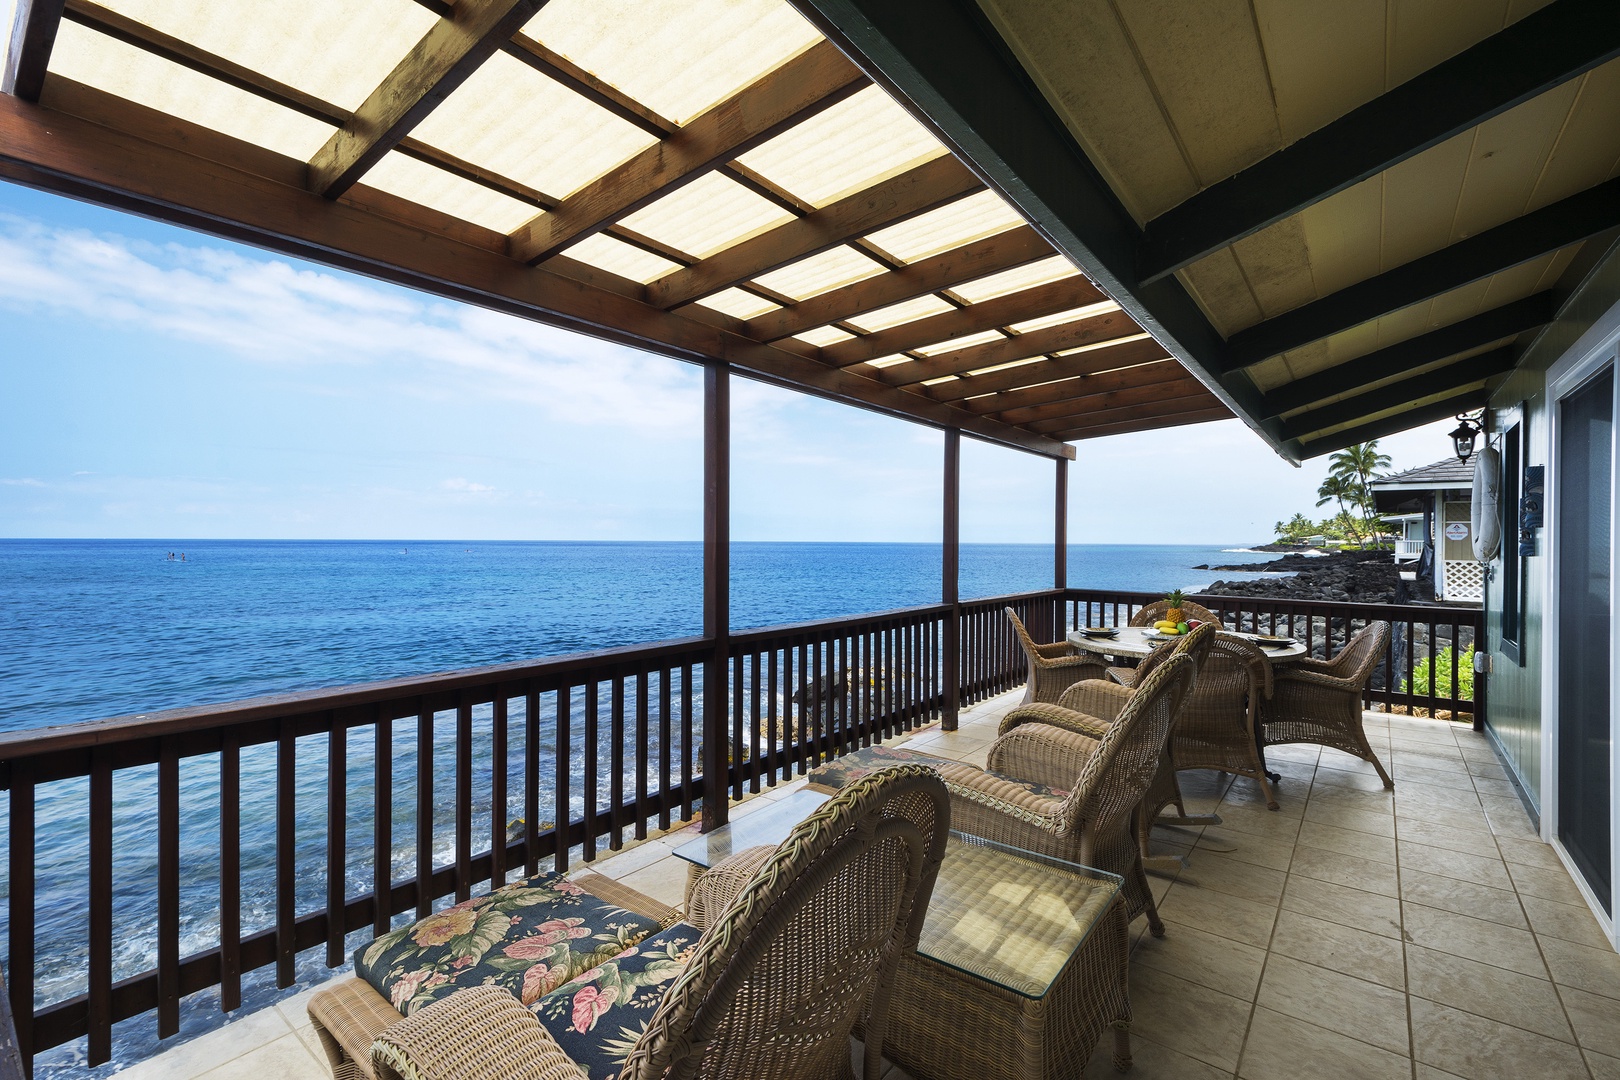 Kailua Kona Vacation Rentals, The Cottage - Large back Lanai with views that go on for miles!